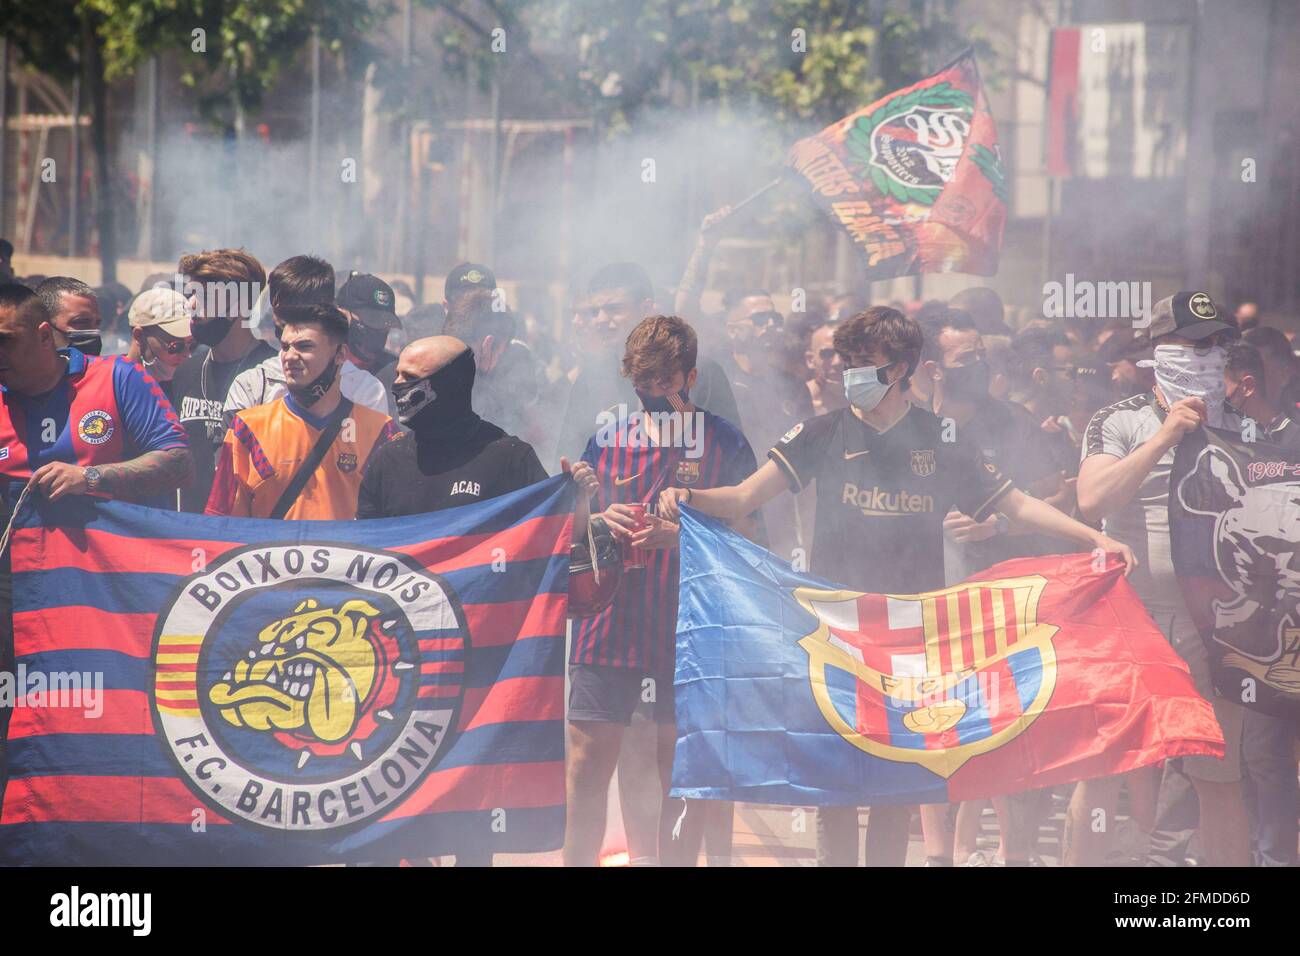 Barcelona, Spain. 08th May, 2021. Football Club Barcelona fans are seen holding ultras and Barça flags. The ultras supporter group of Football Club Barcelona, Boixos Nois (Crazy Boys) have gathered outside the Camp Nou stadium to motivate the team before the match against Club Atletico de Madrid for the 35th round of La Liga, the Spanish football league. Barça's victory will put the team, currently in third place, ahead of Atletico de Madrid, which occupies the first position. (Photo by Thiago Prudencio/SOPA Images/Sipa USA) Credit: Sipa USA/Alamy Live News Stock Photo